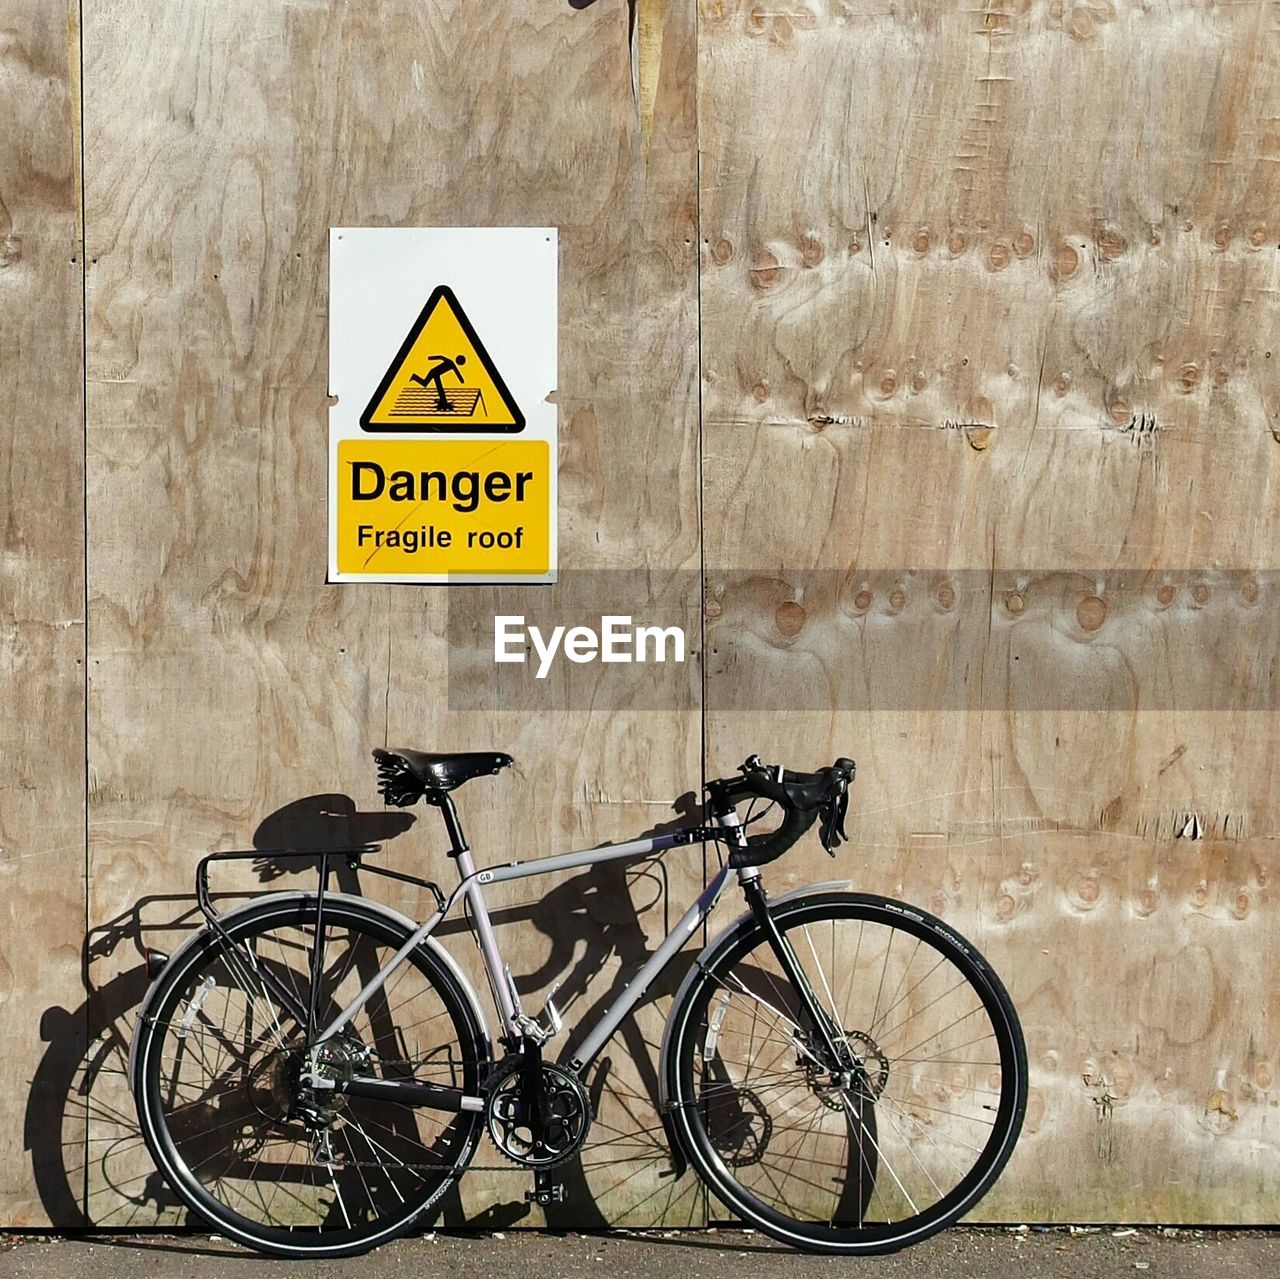 Bike leaning against wall with warning sign